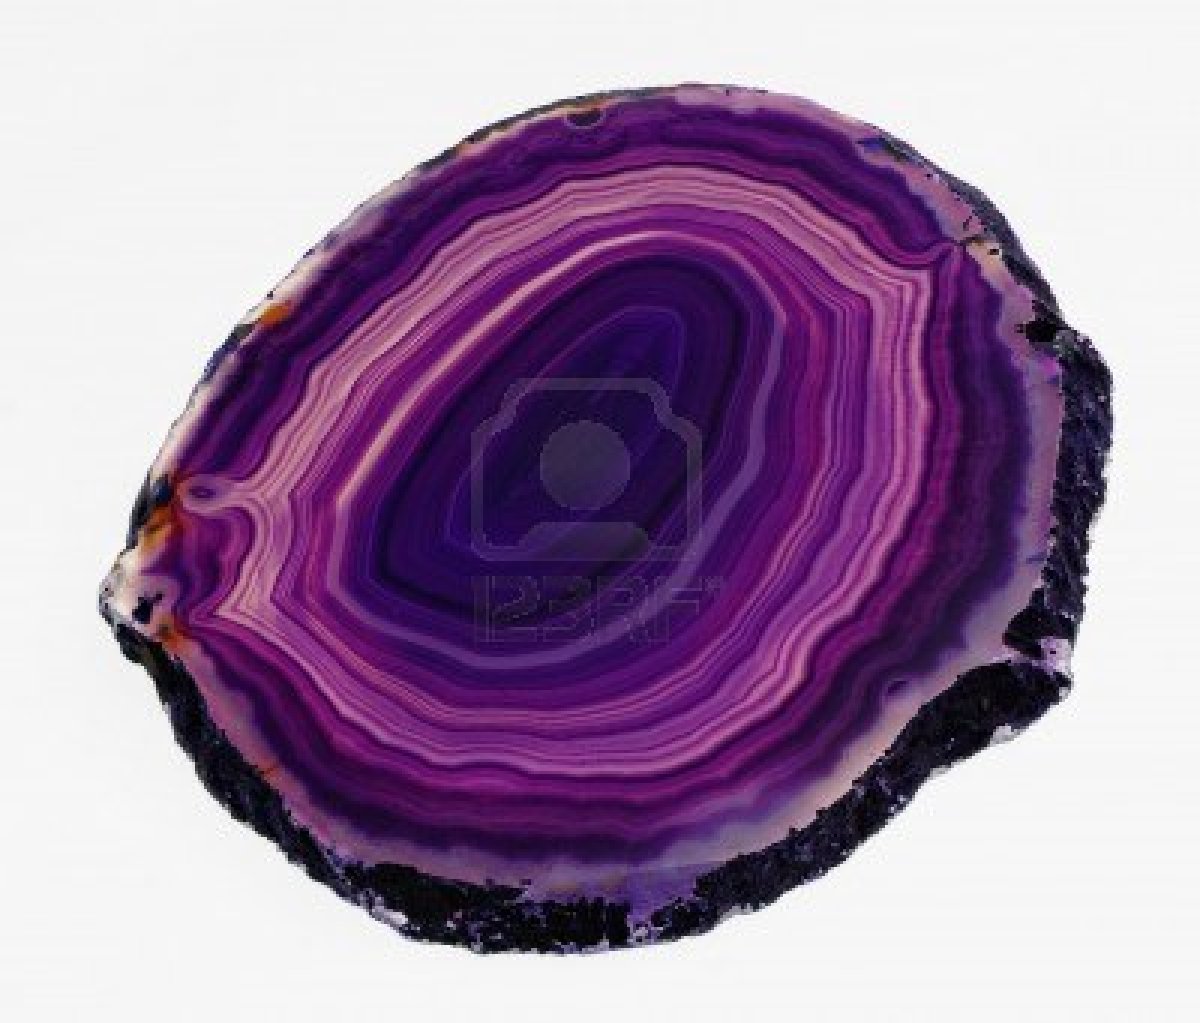 purple agate stone meaning